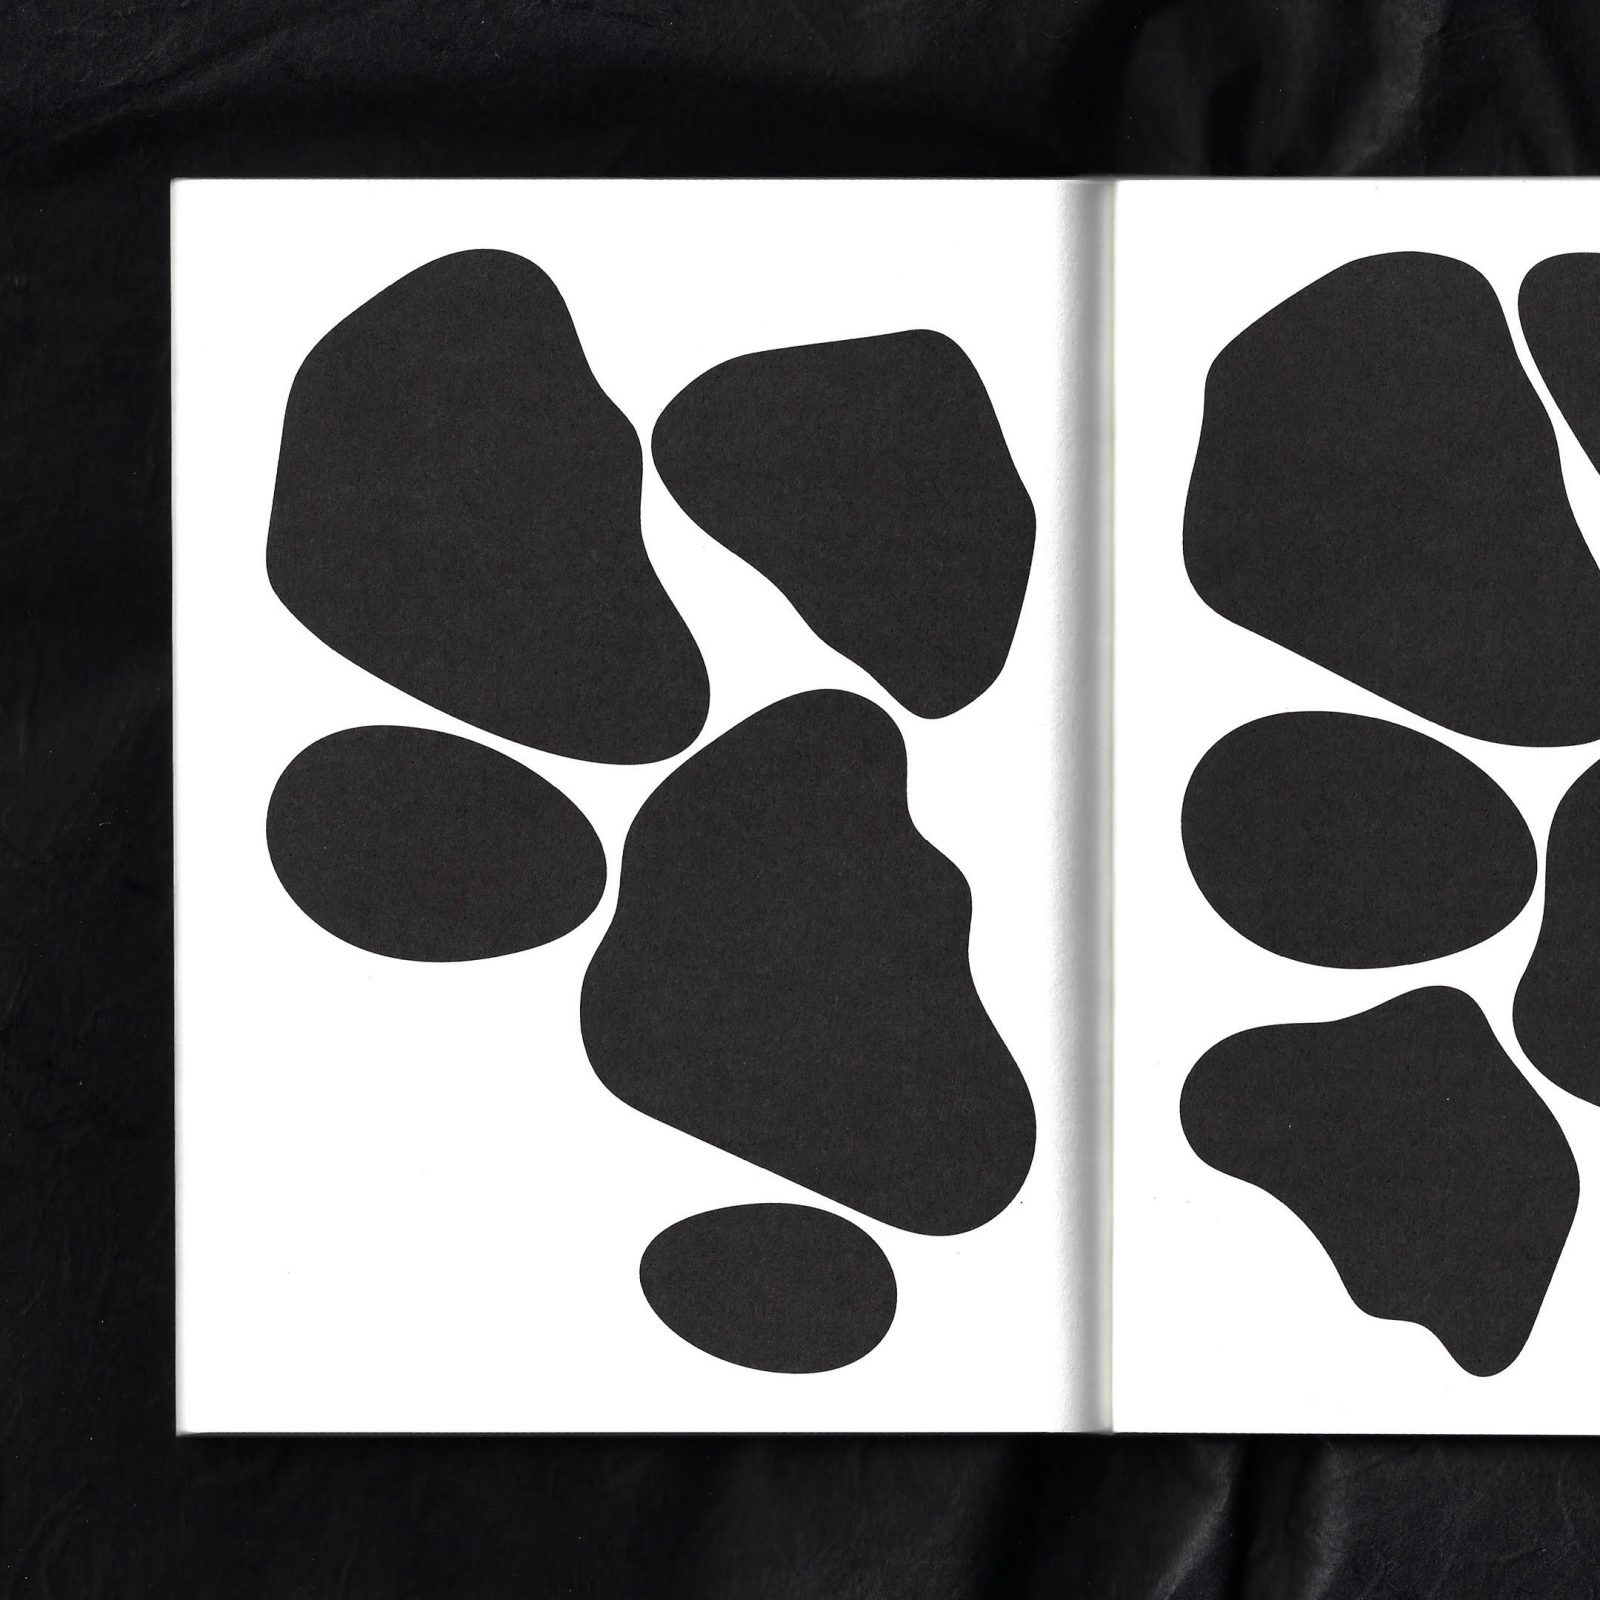 Donau Book by CinCin Captivates With Minimal Design, and beautiful papers